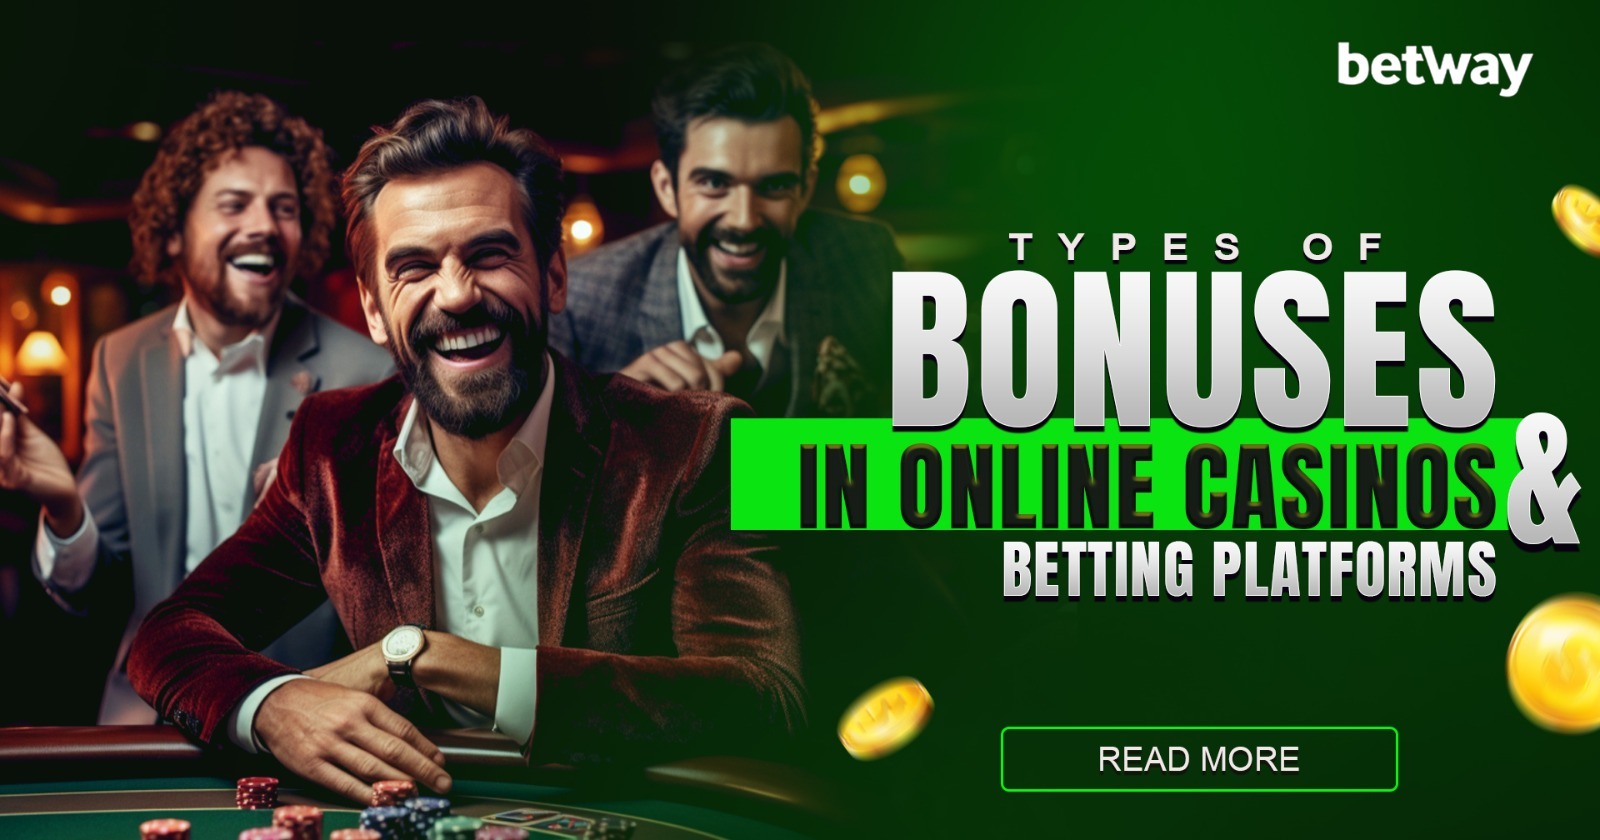 Types of Bonuses in Online Casinos and Betting Platforms. – A4Everyone